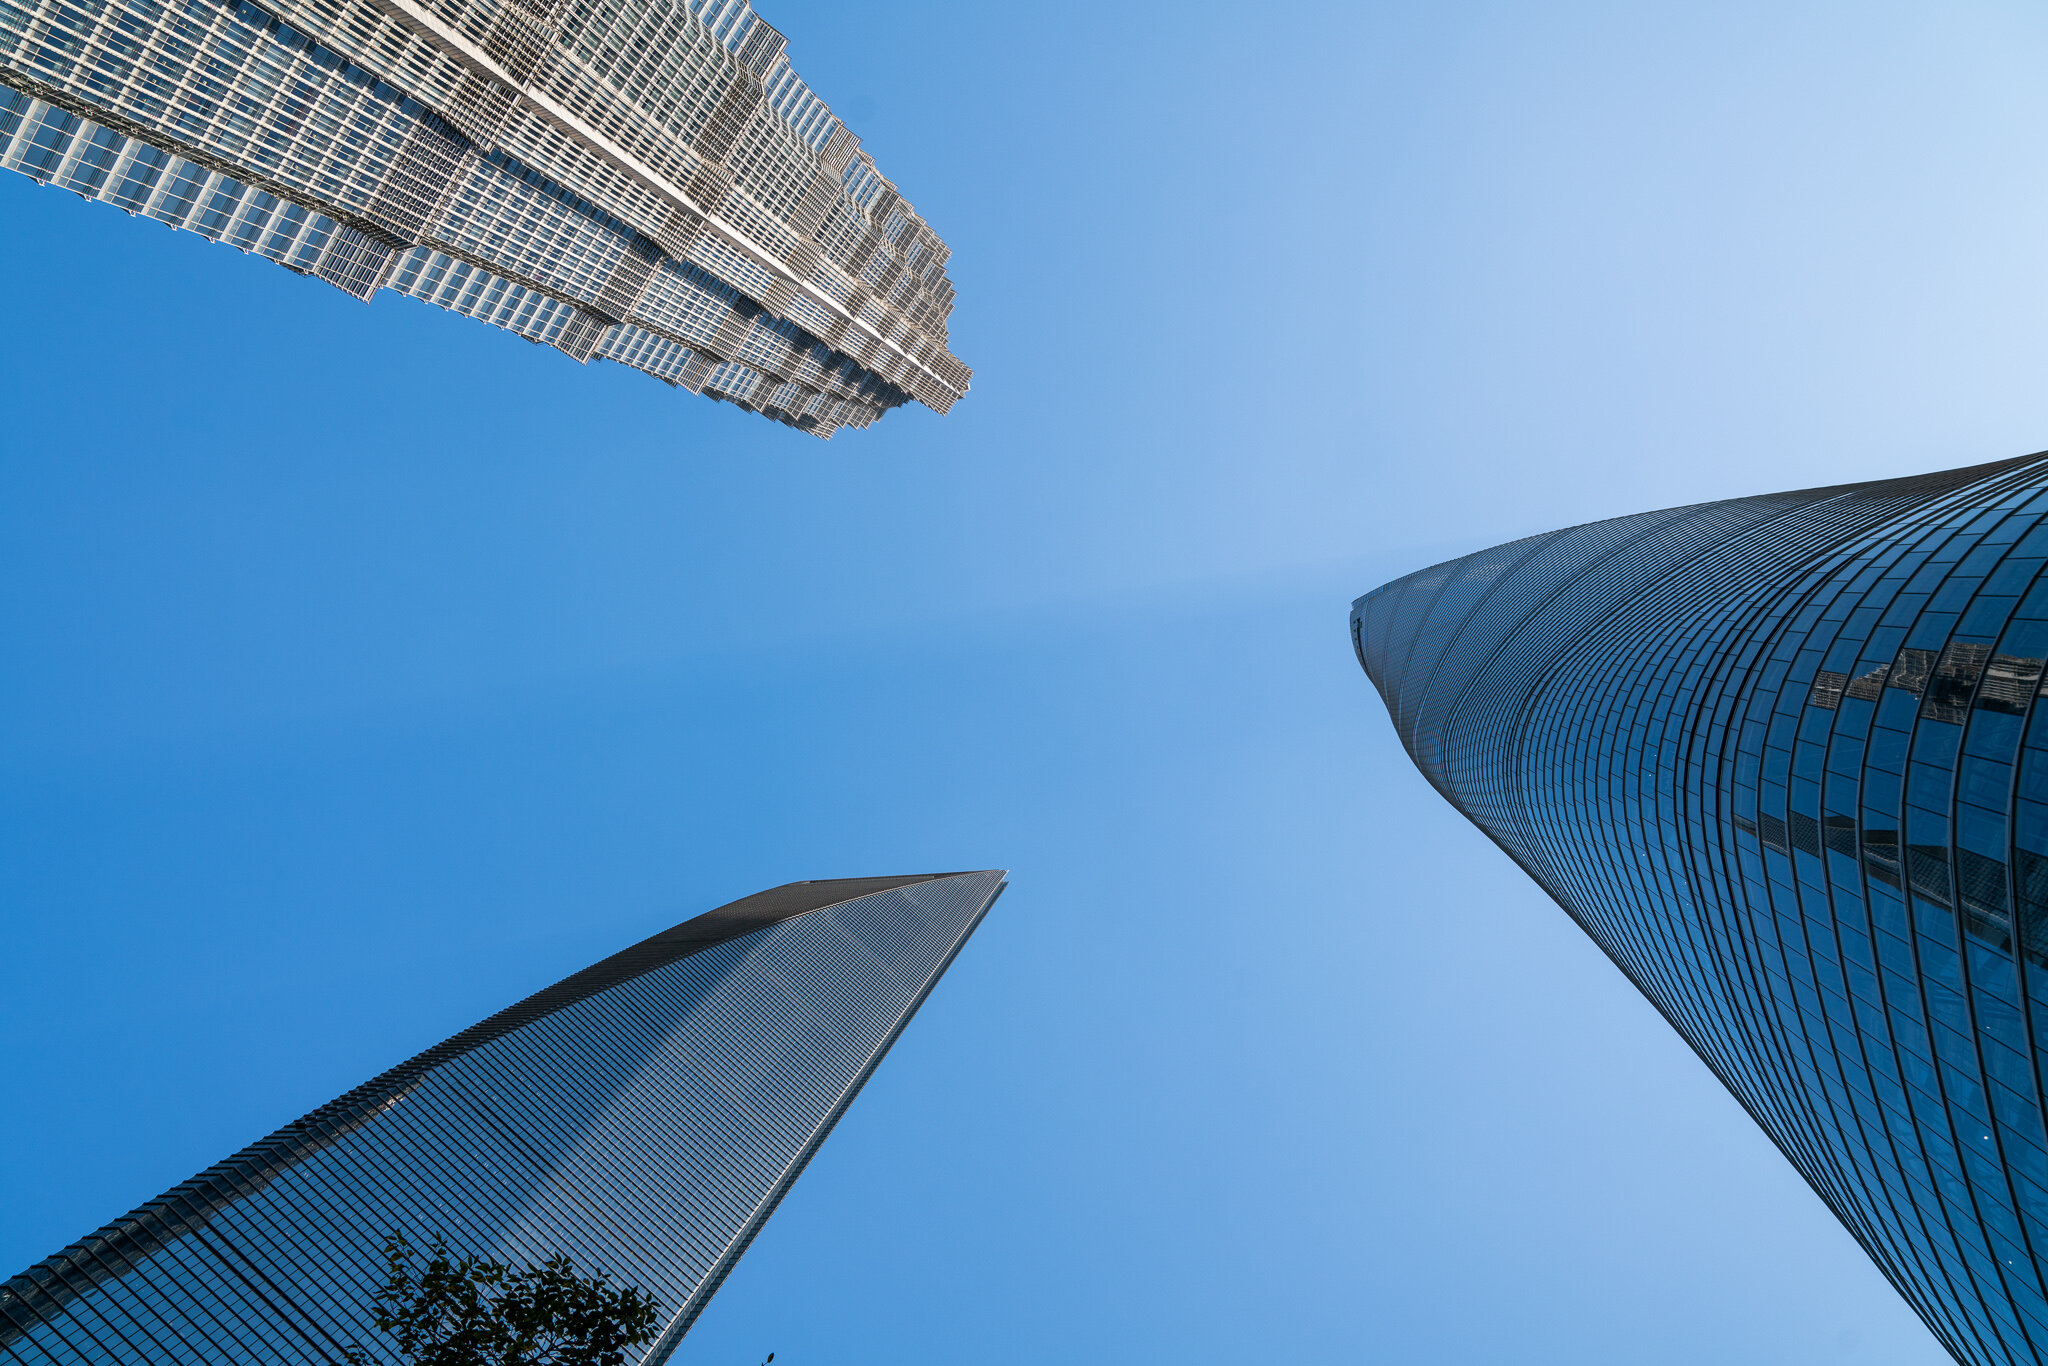 Shanghai Tower and surrounding buildings